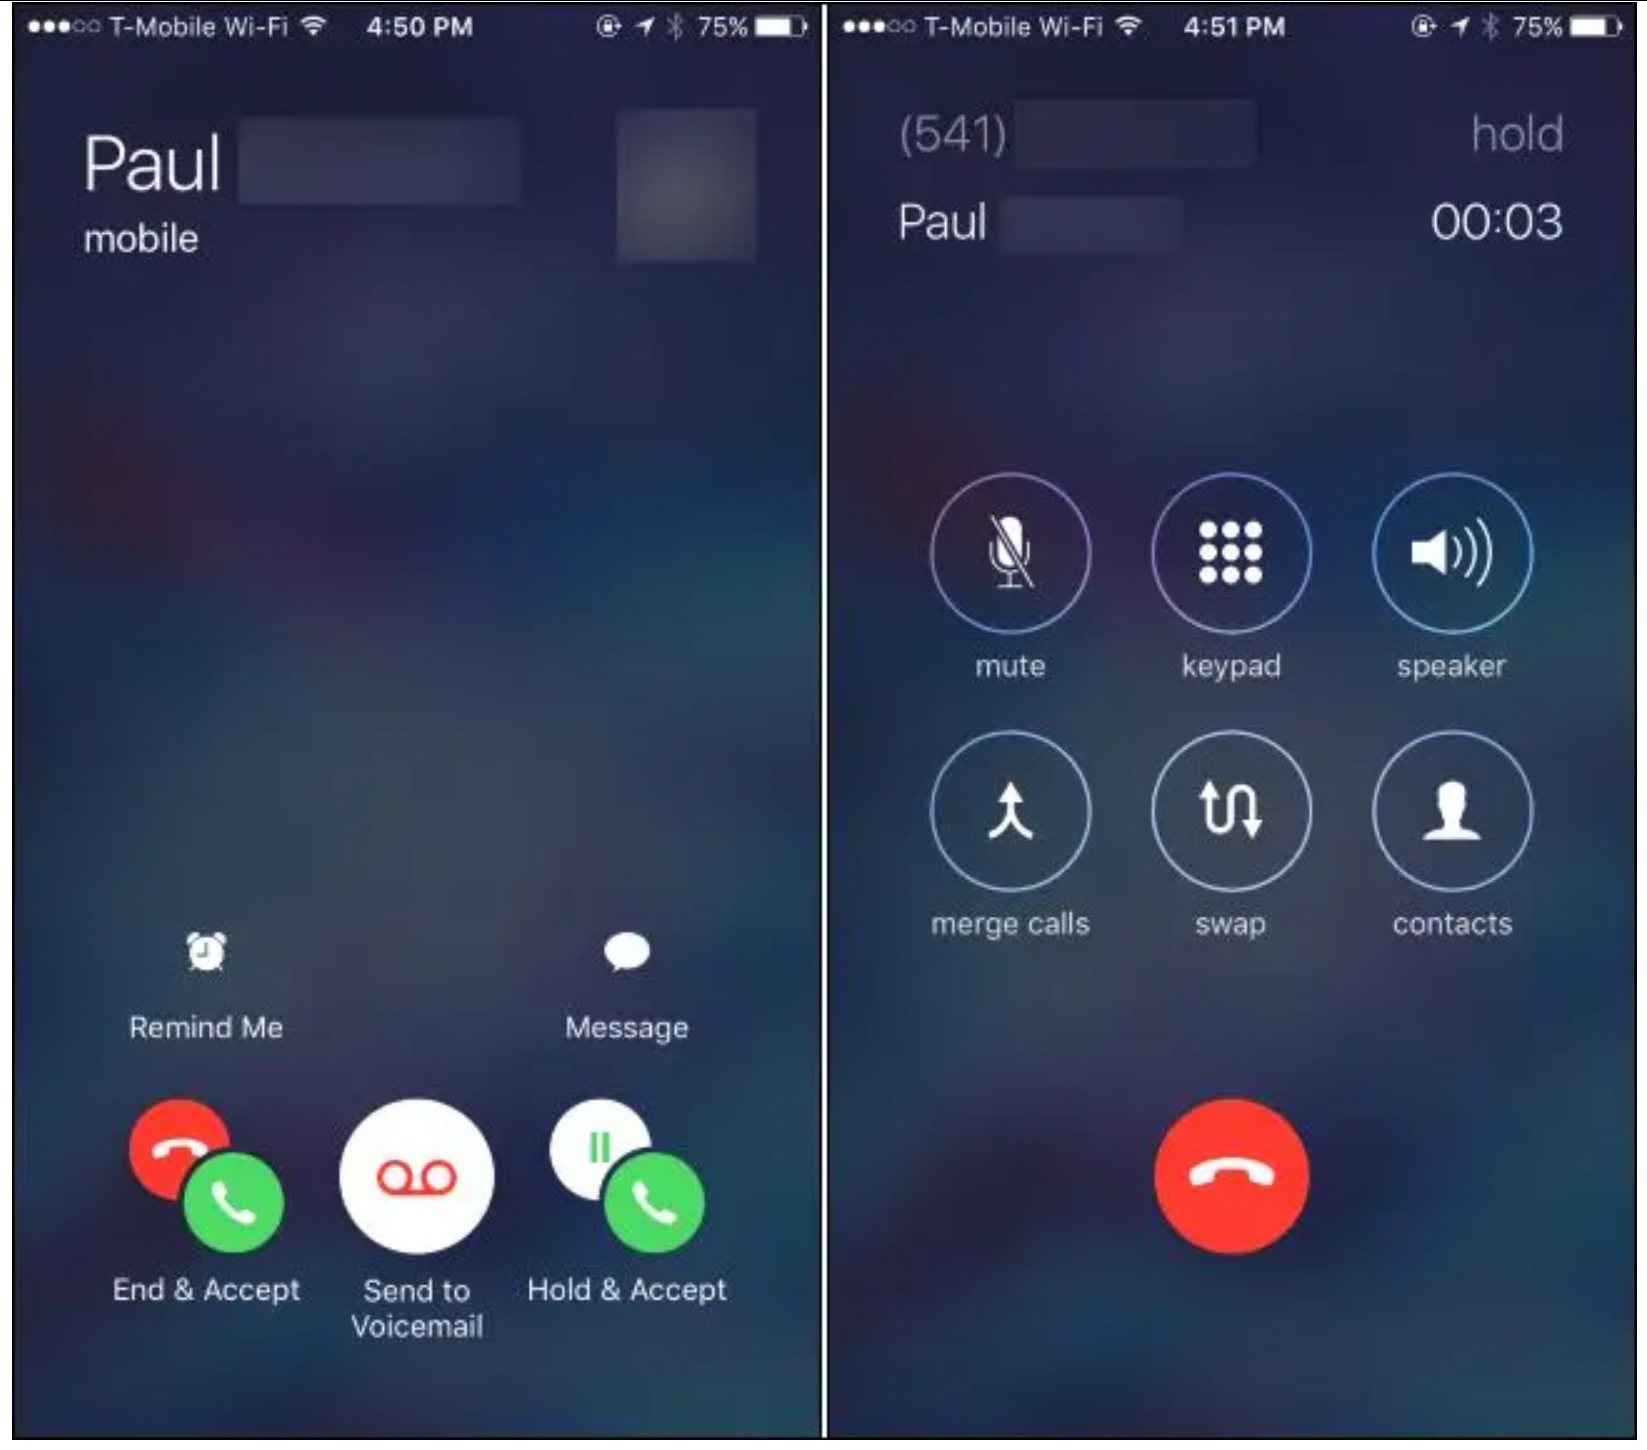 Conference Call On A Iphone - How to Hold a Conference Call with Your iPhone